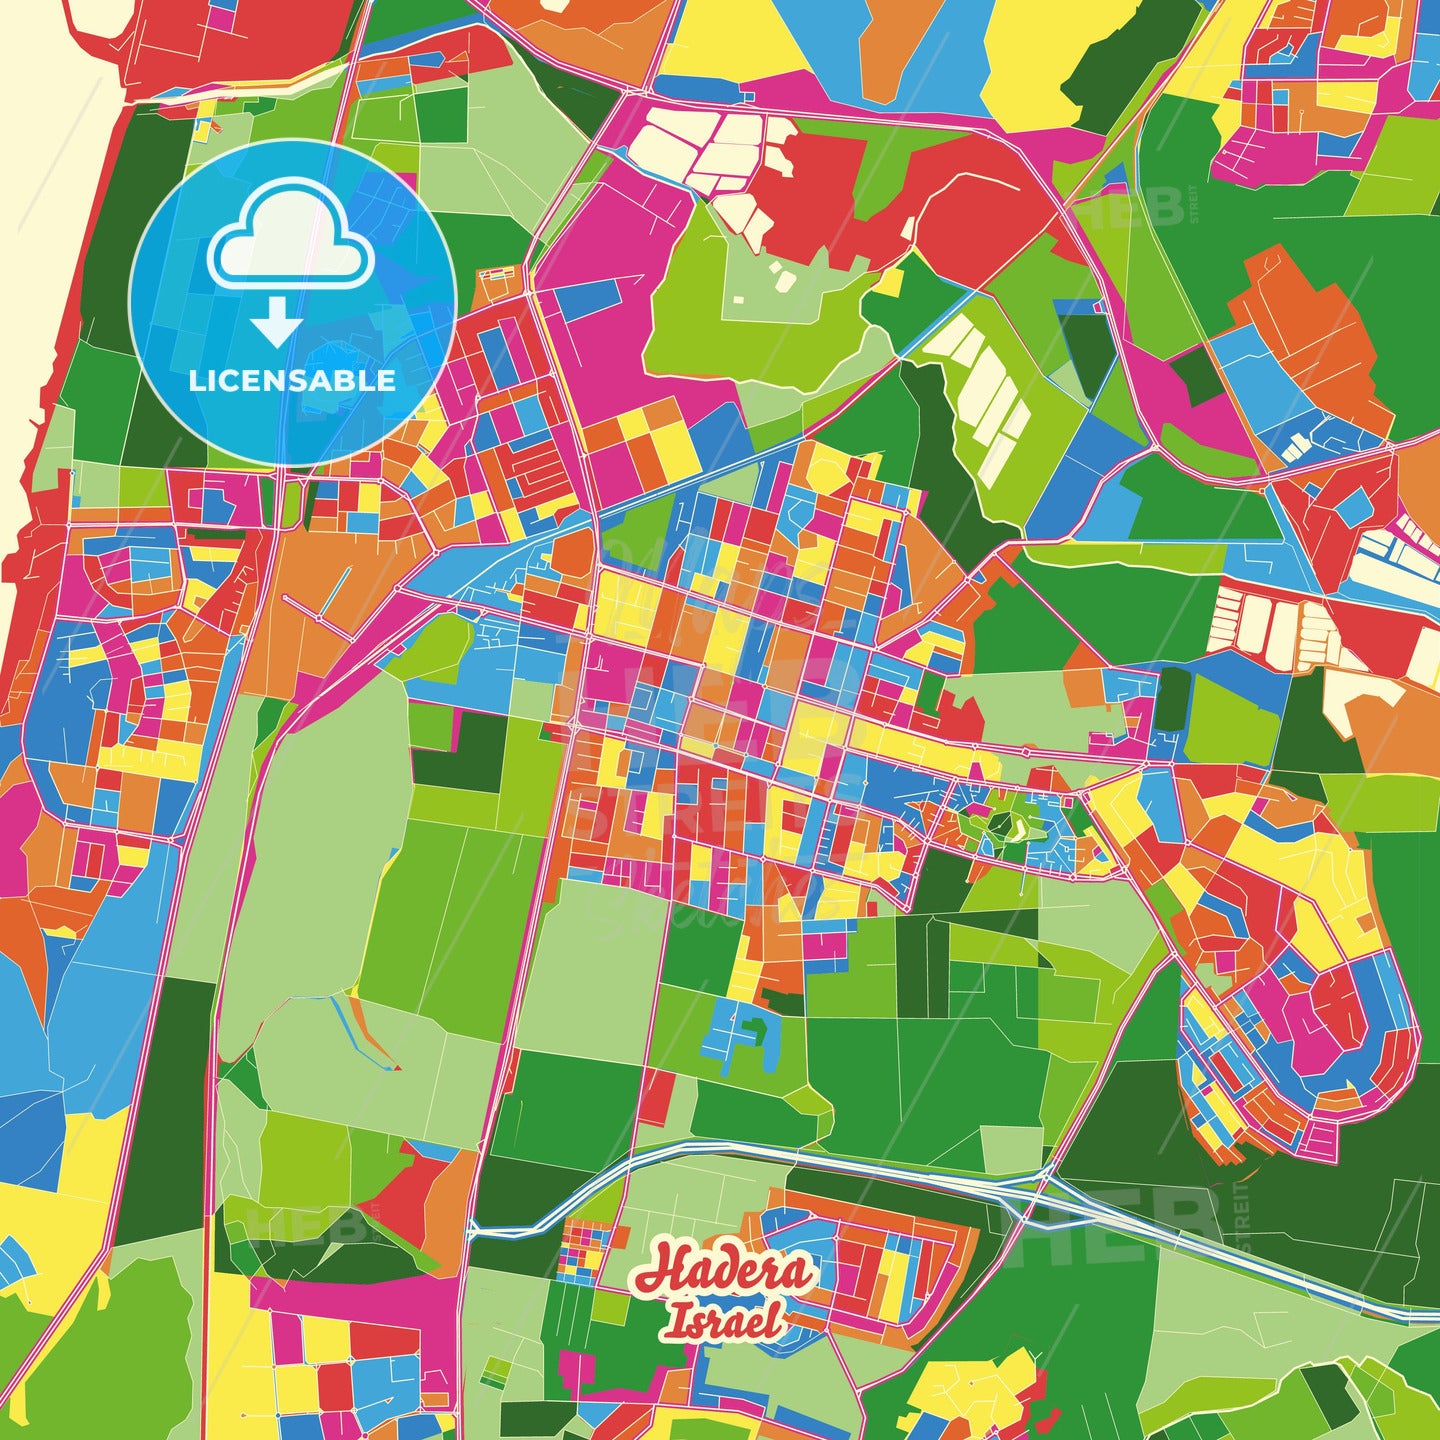 Hadera, Israel Crazy Colorful Street Map Poster Template - HEBSTREITS Sketches